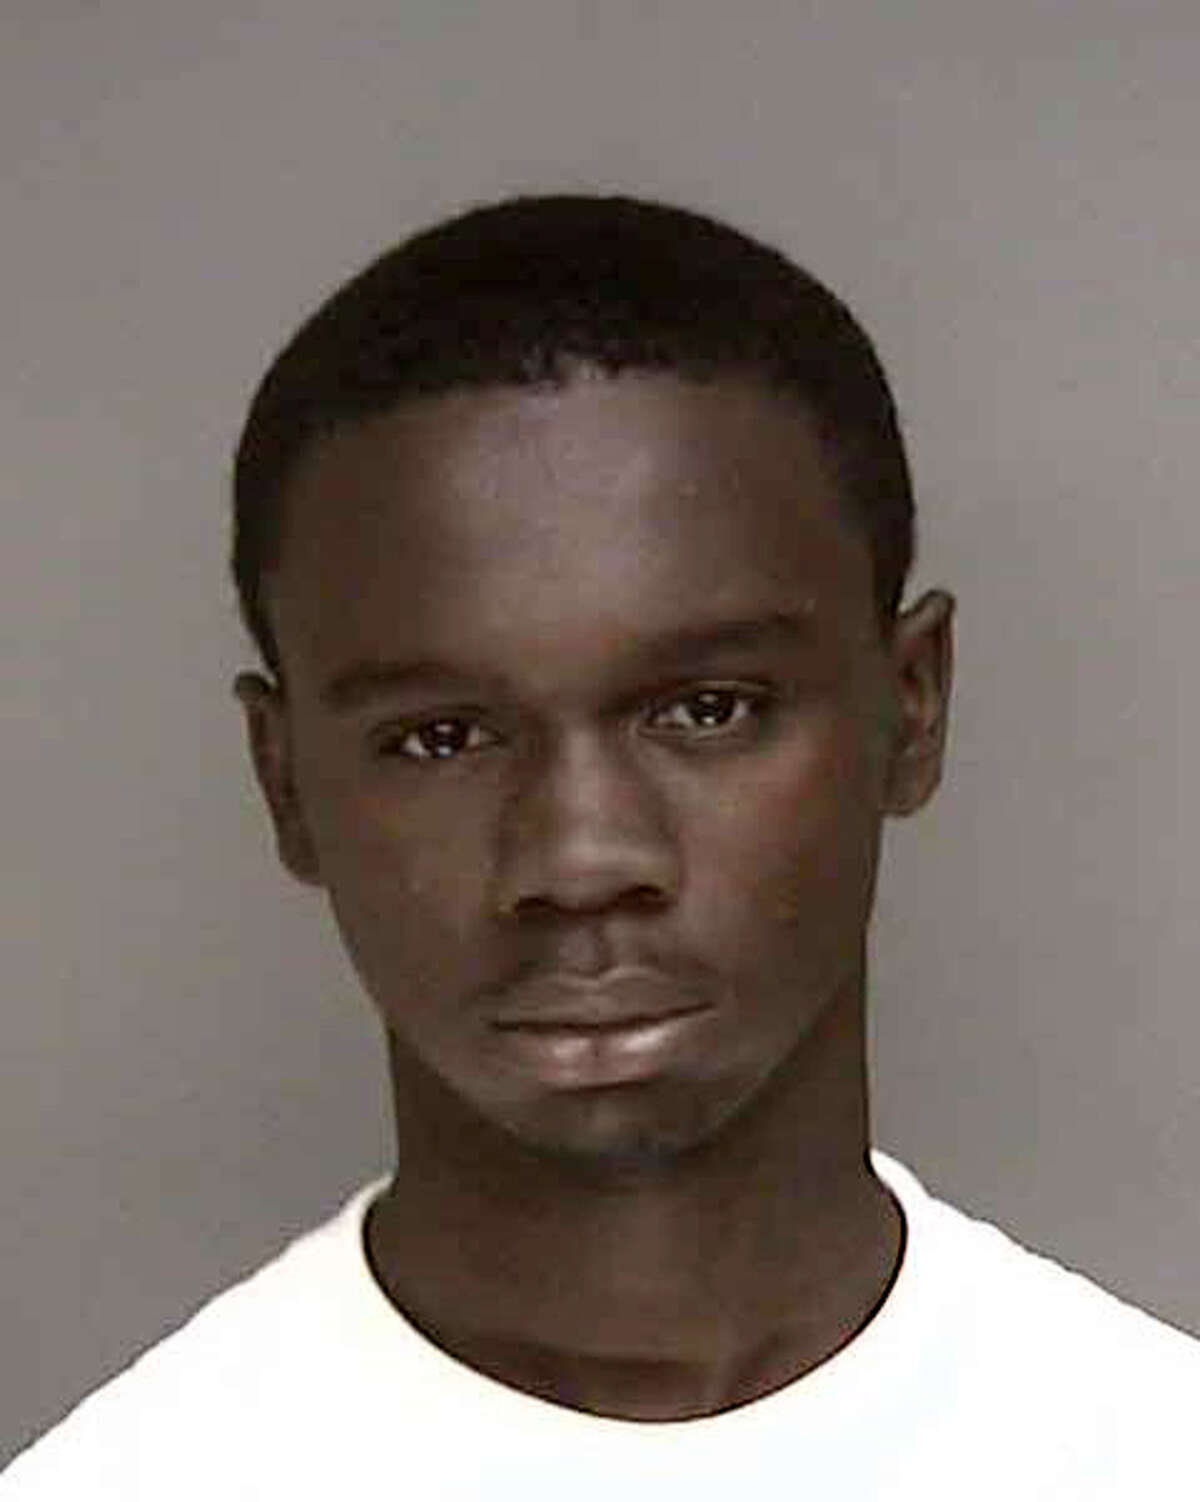 18-year-old Laheem "Hemme" Jones, of Washington Avenue, in Bridgeport, Conn. was charged with the January murder of 14-year-old Justin Thompson on Tuesday, Nov. 6, 2012.